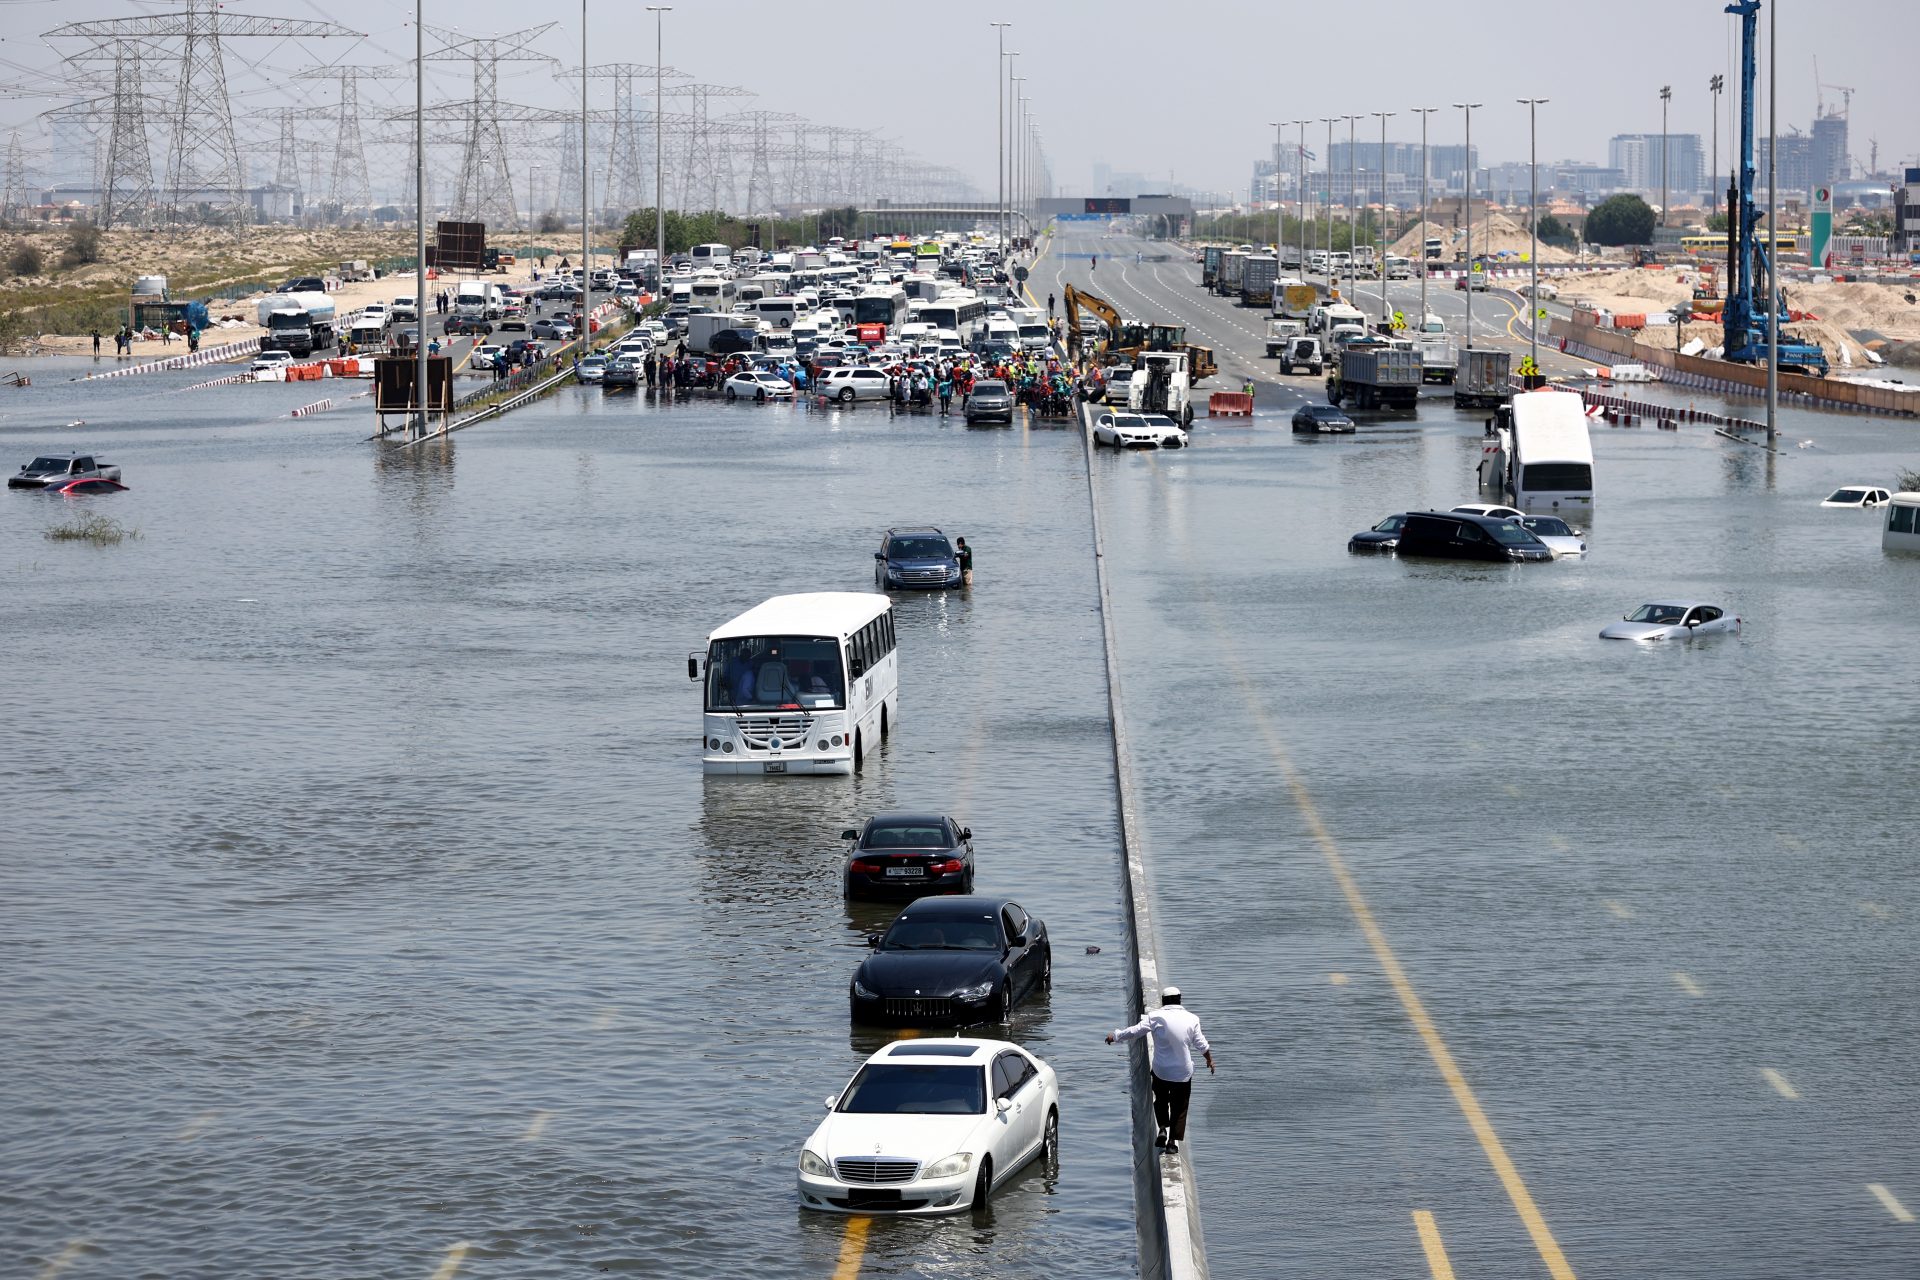 In Pictures: Dubai flooded after historic rains